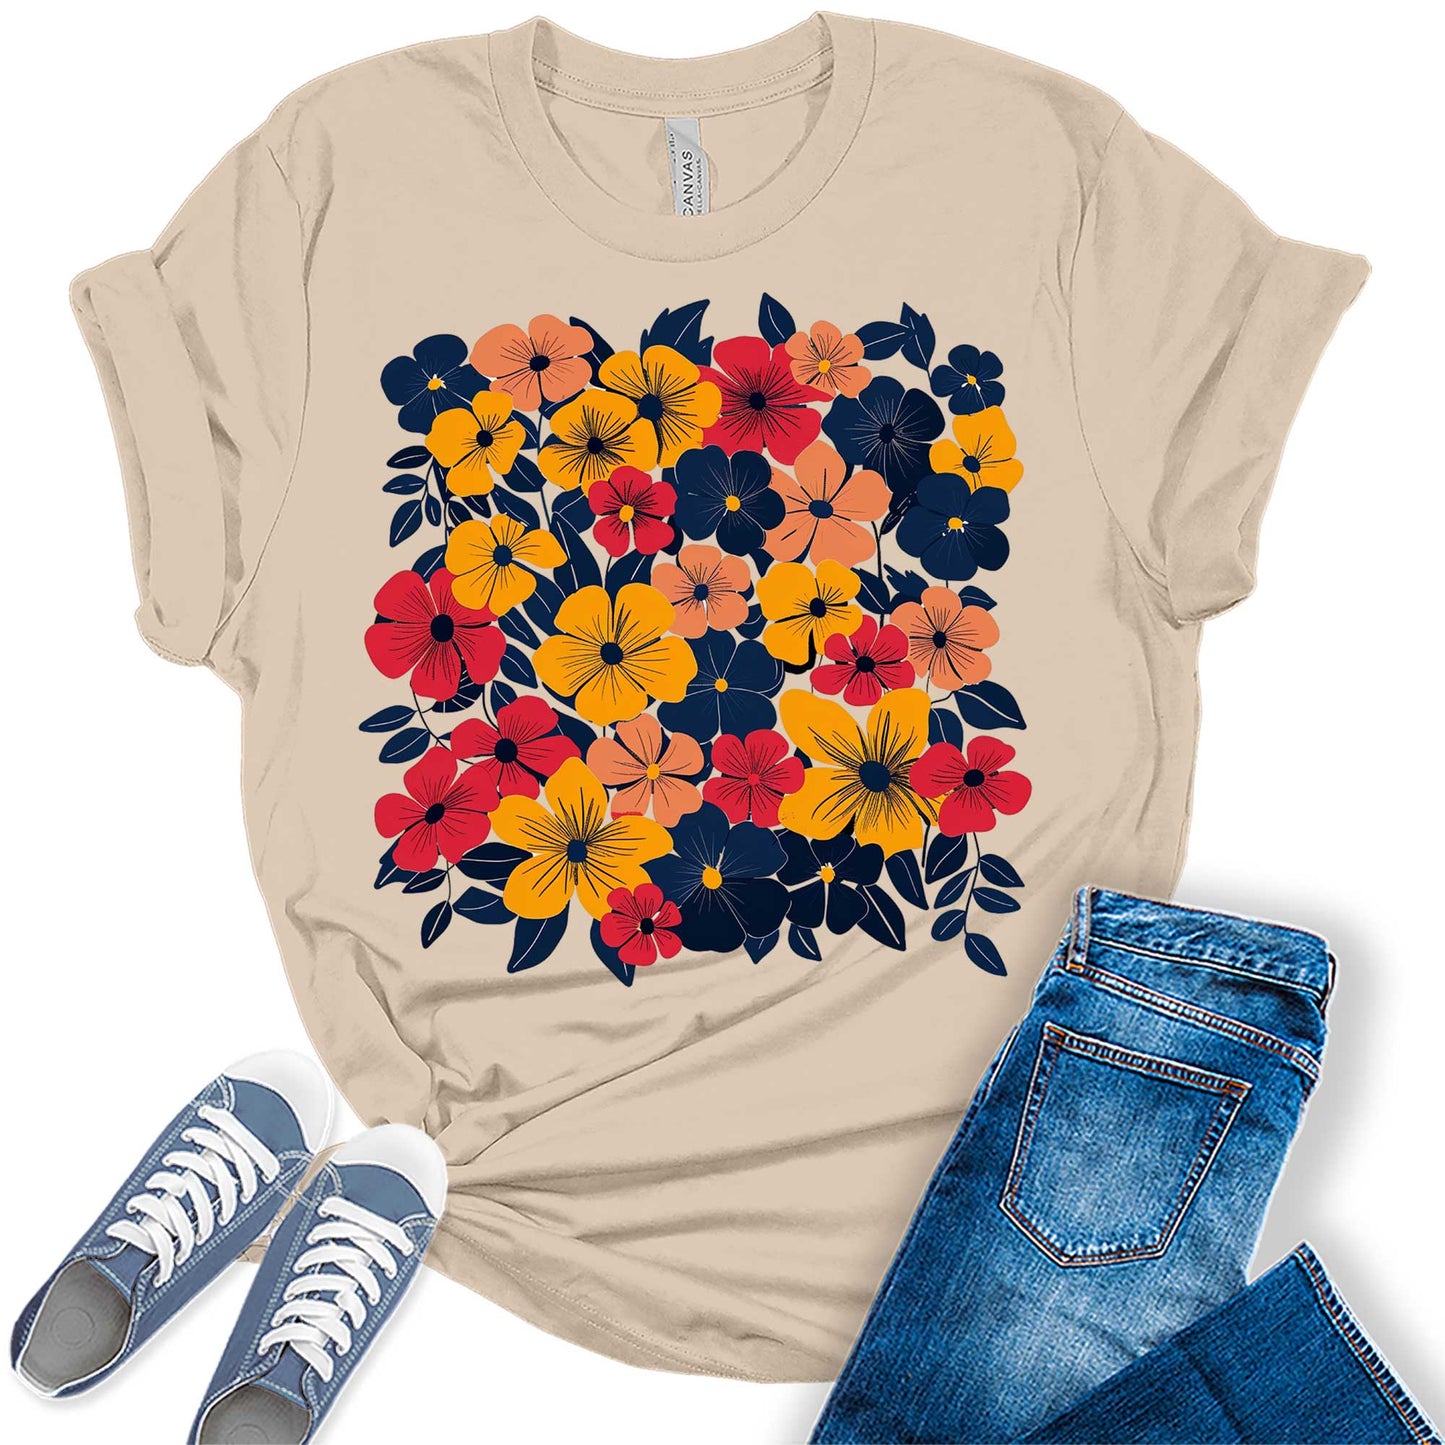 Floral Wildflower Shirt Vintage Boho Graphic Tees for Women Trendy Plus Size Summer Tops